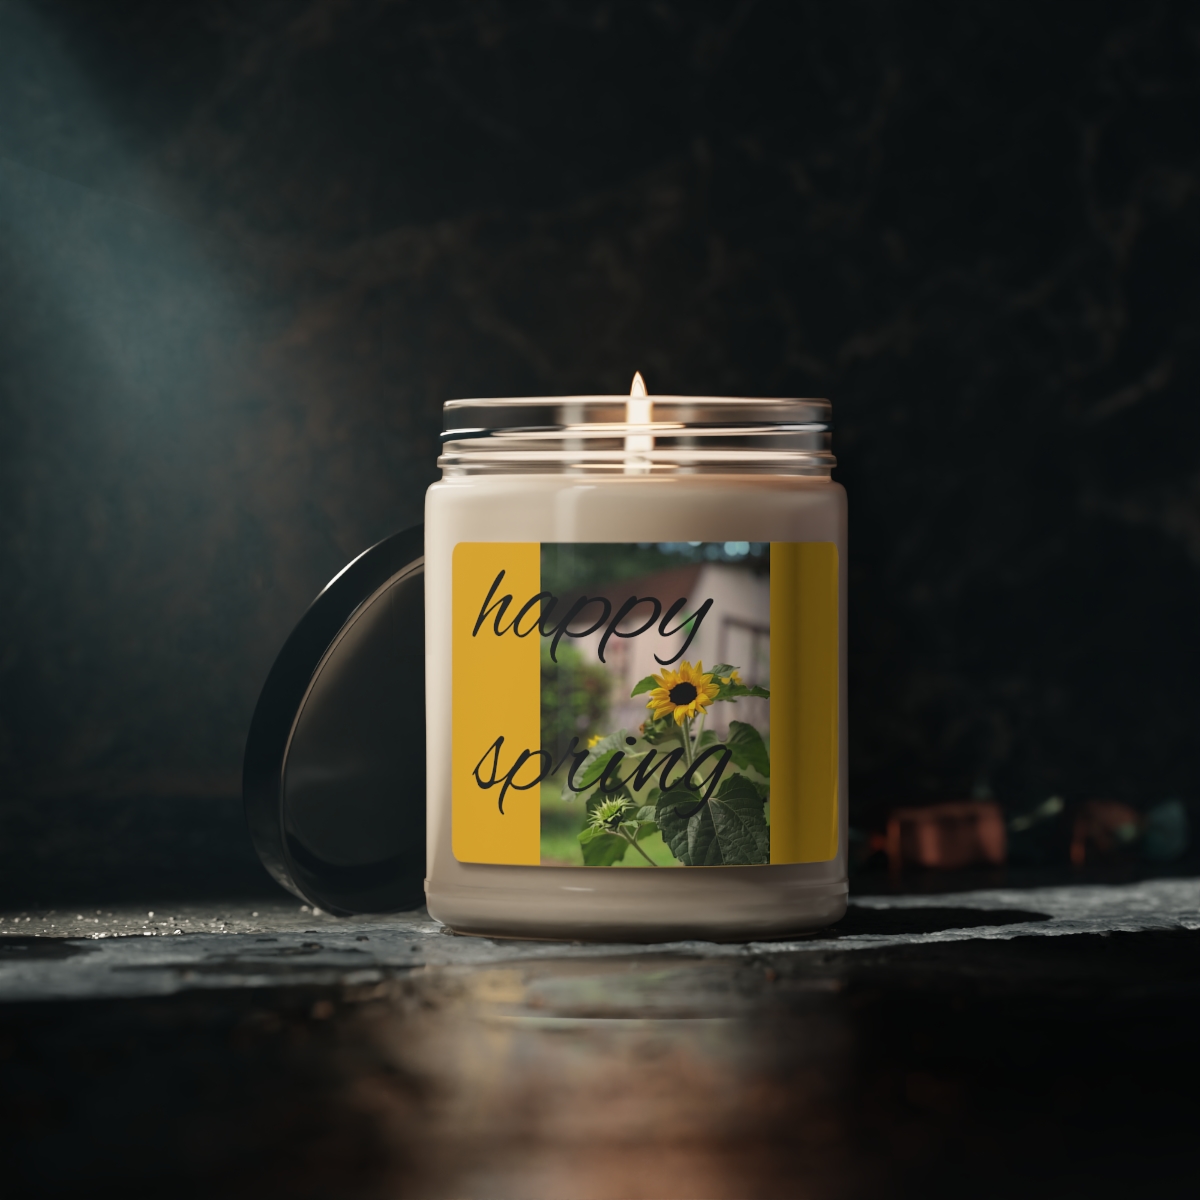 Light up the spring! Scented Soy Candle, 9oz product thumbnail image